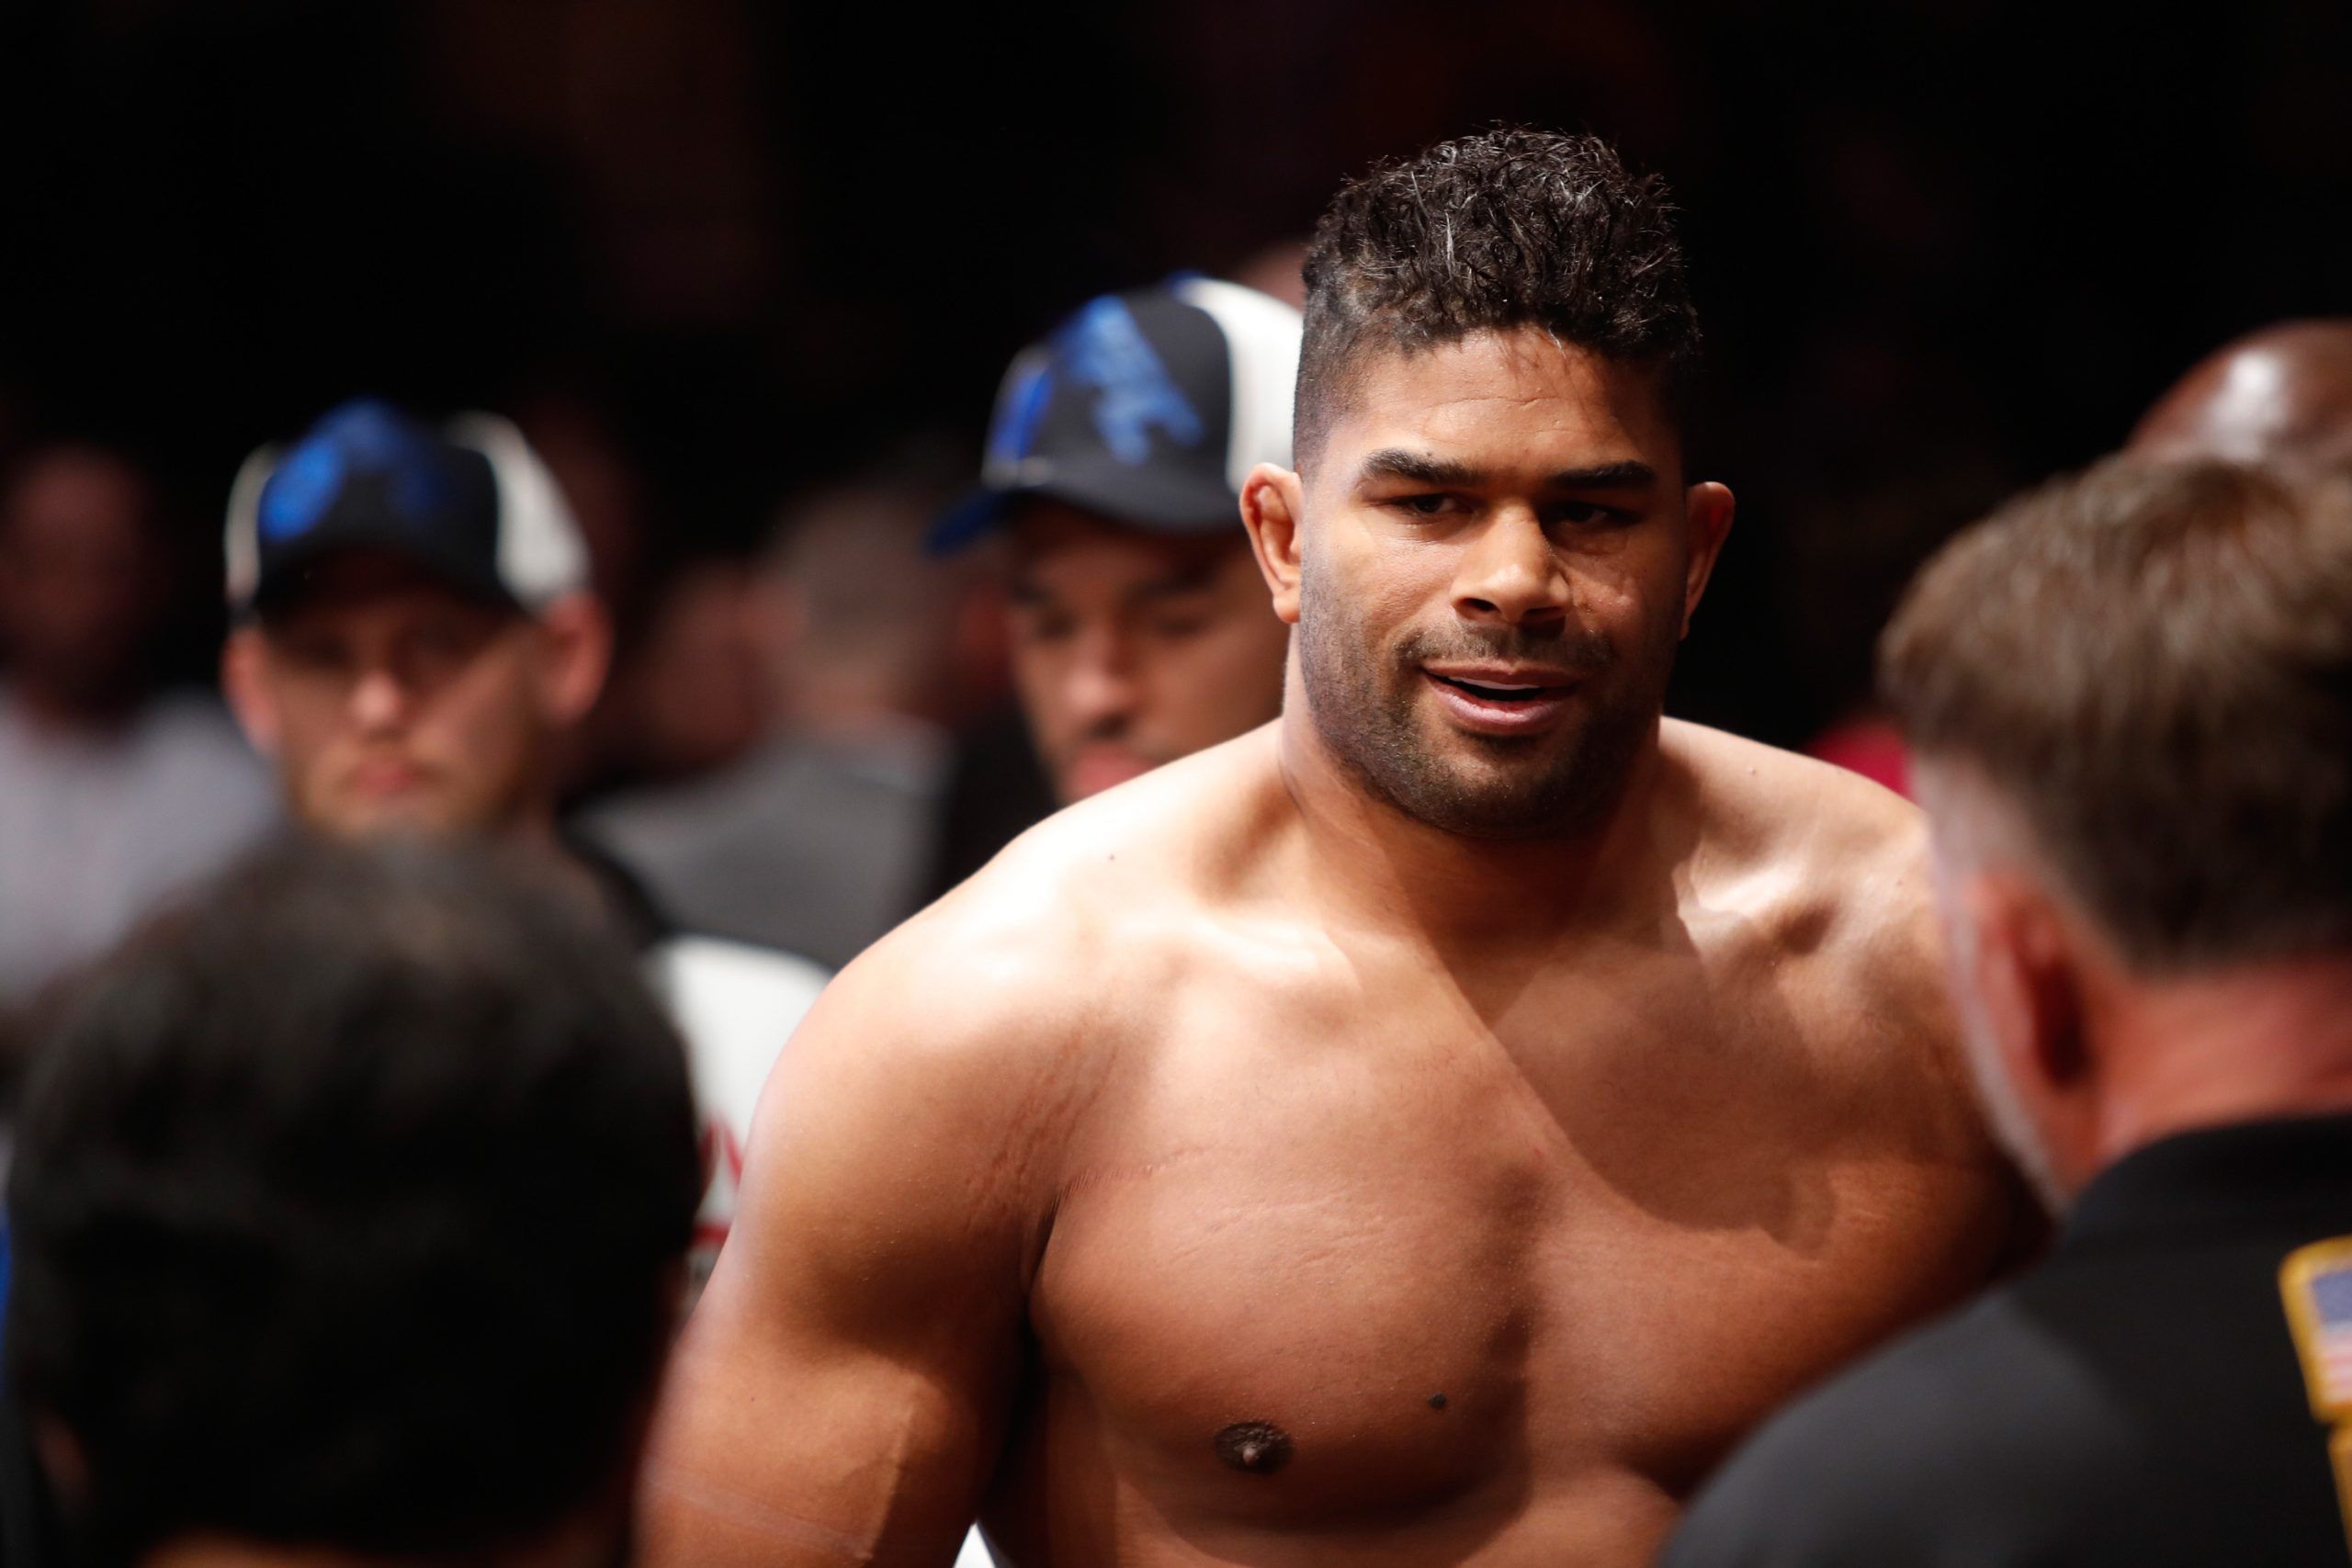 Alistair Overeem of the Netherlands prepares to enter the Octagon for a heavyweight fight scaled